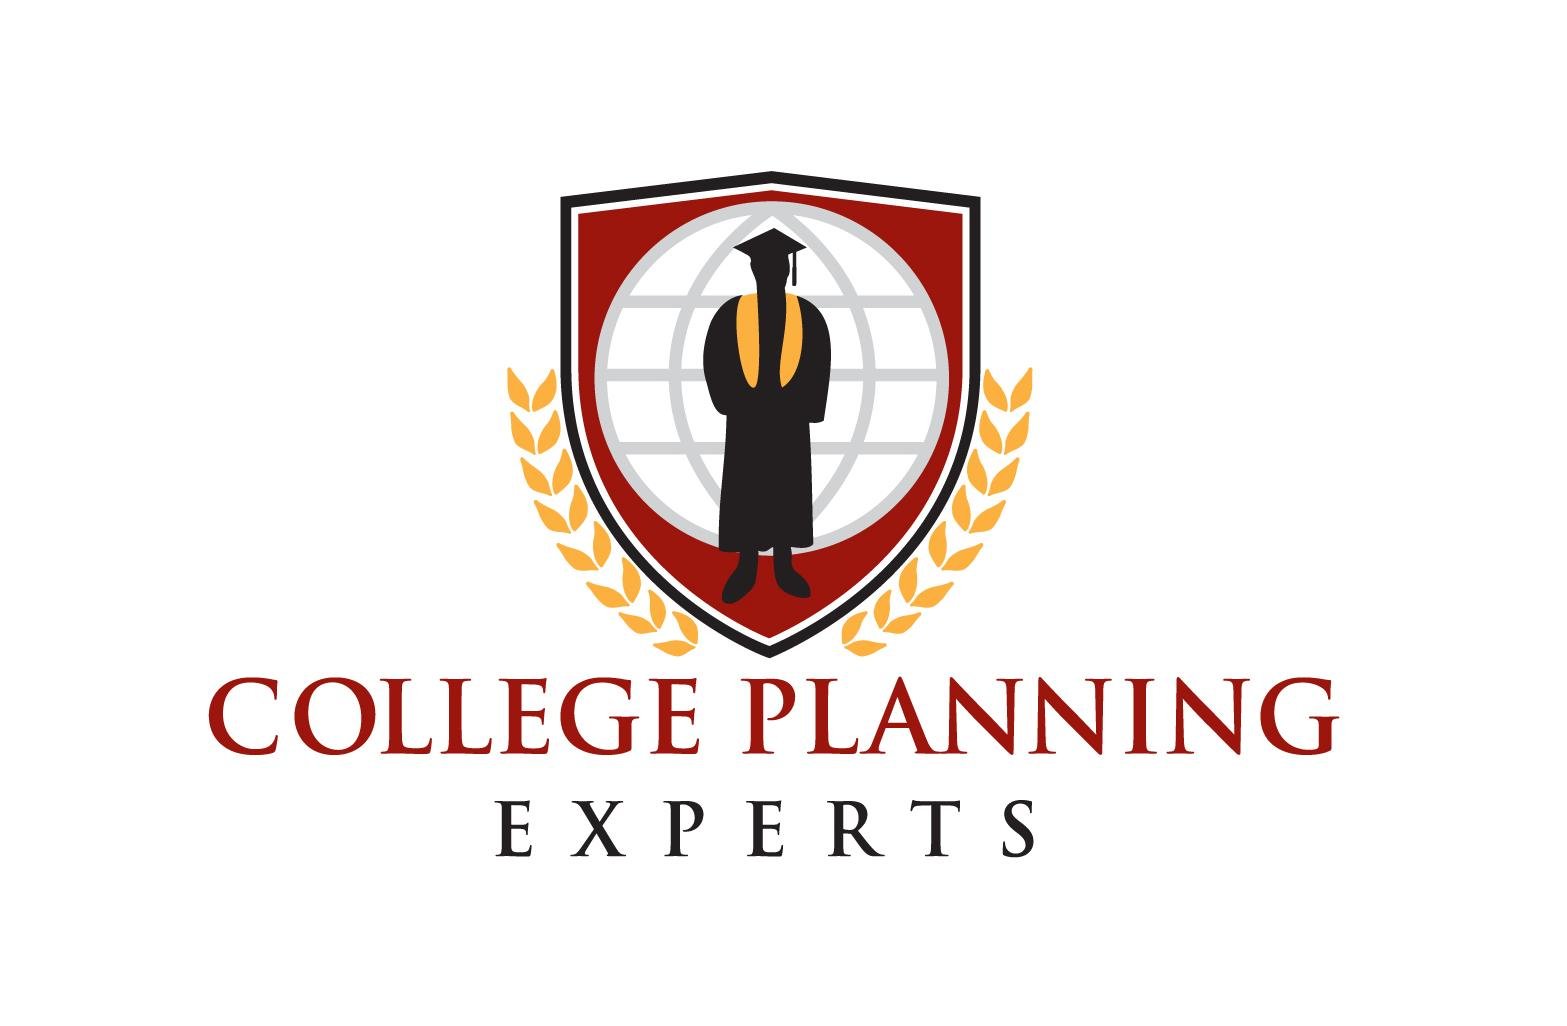 College Consultant Offers High-Income Illinois Families Financial Aid Planning